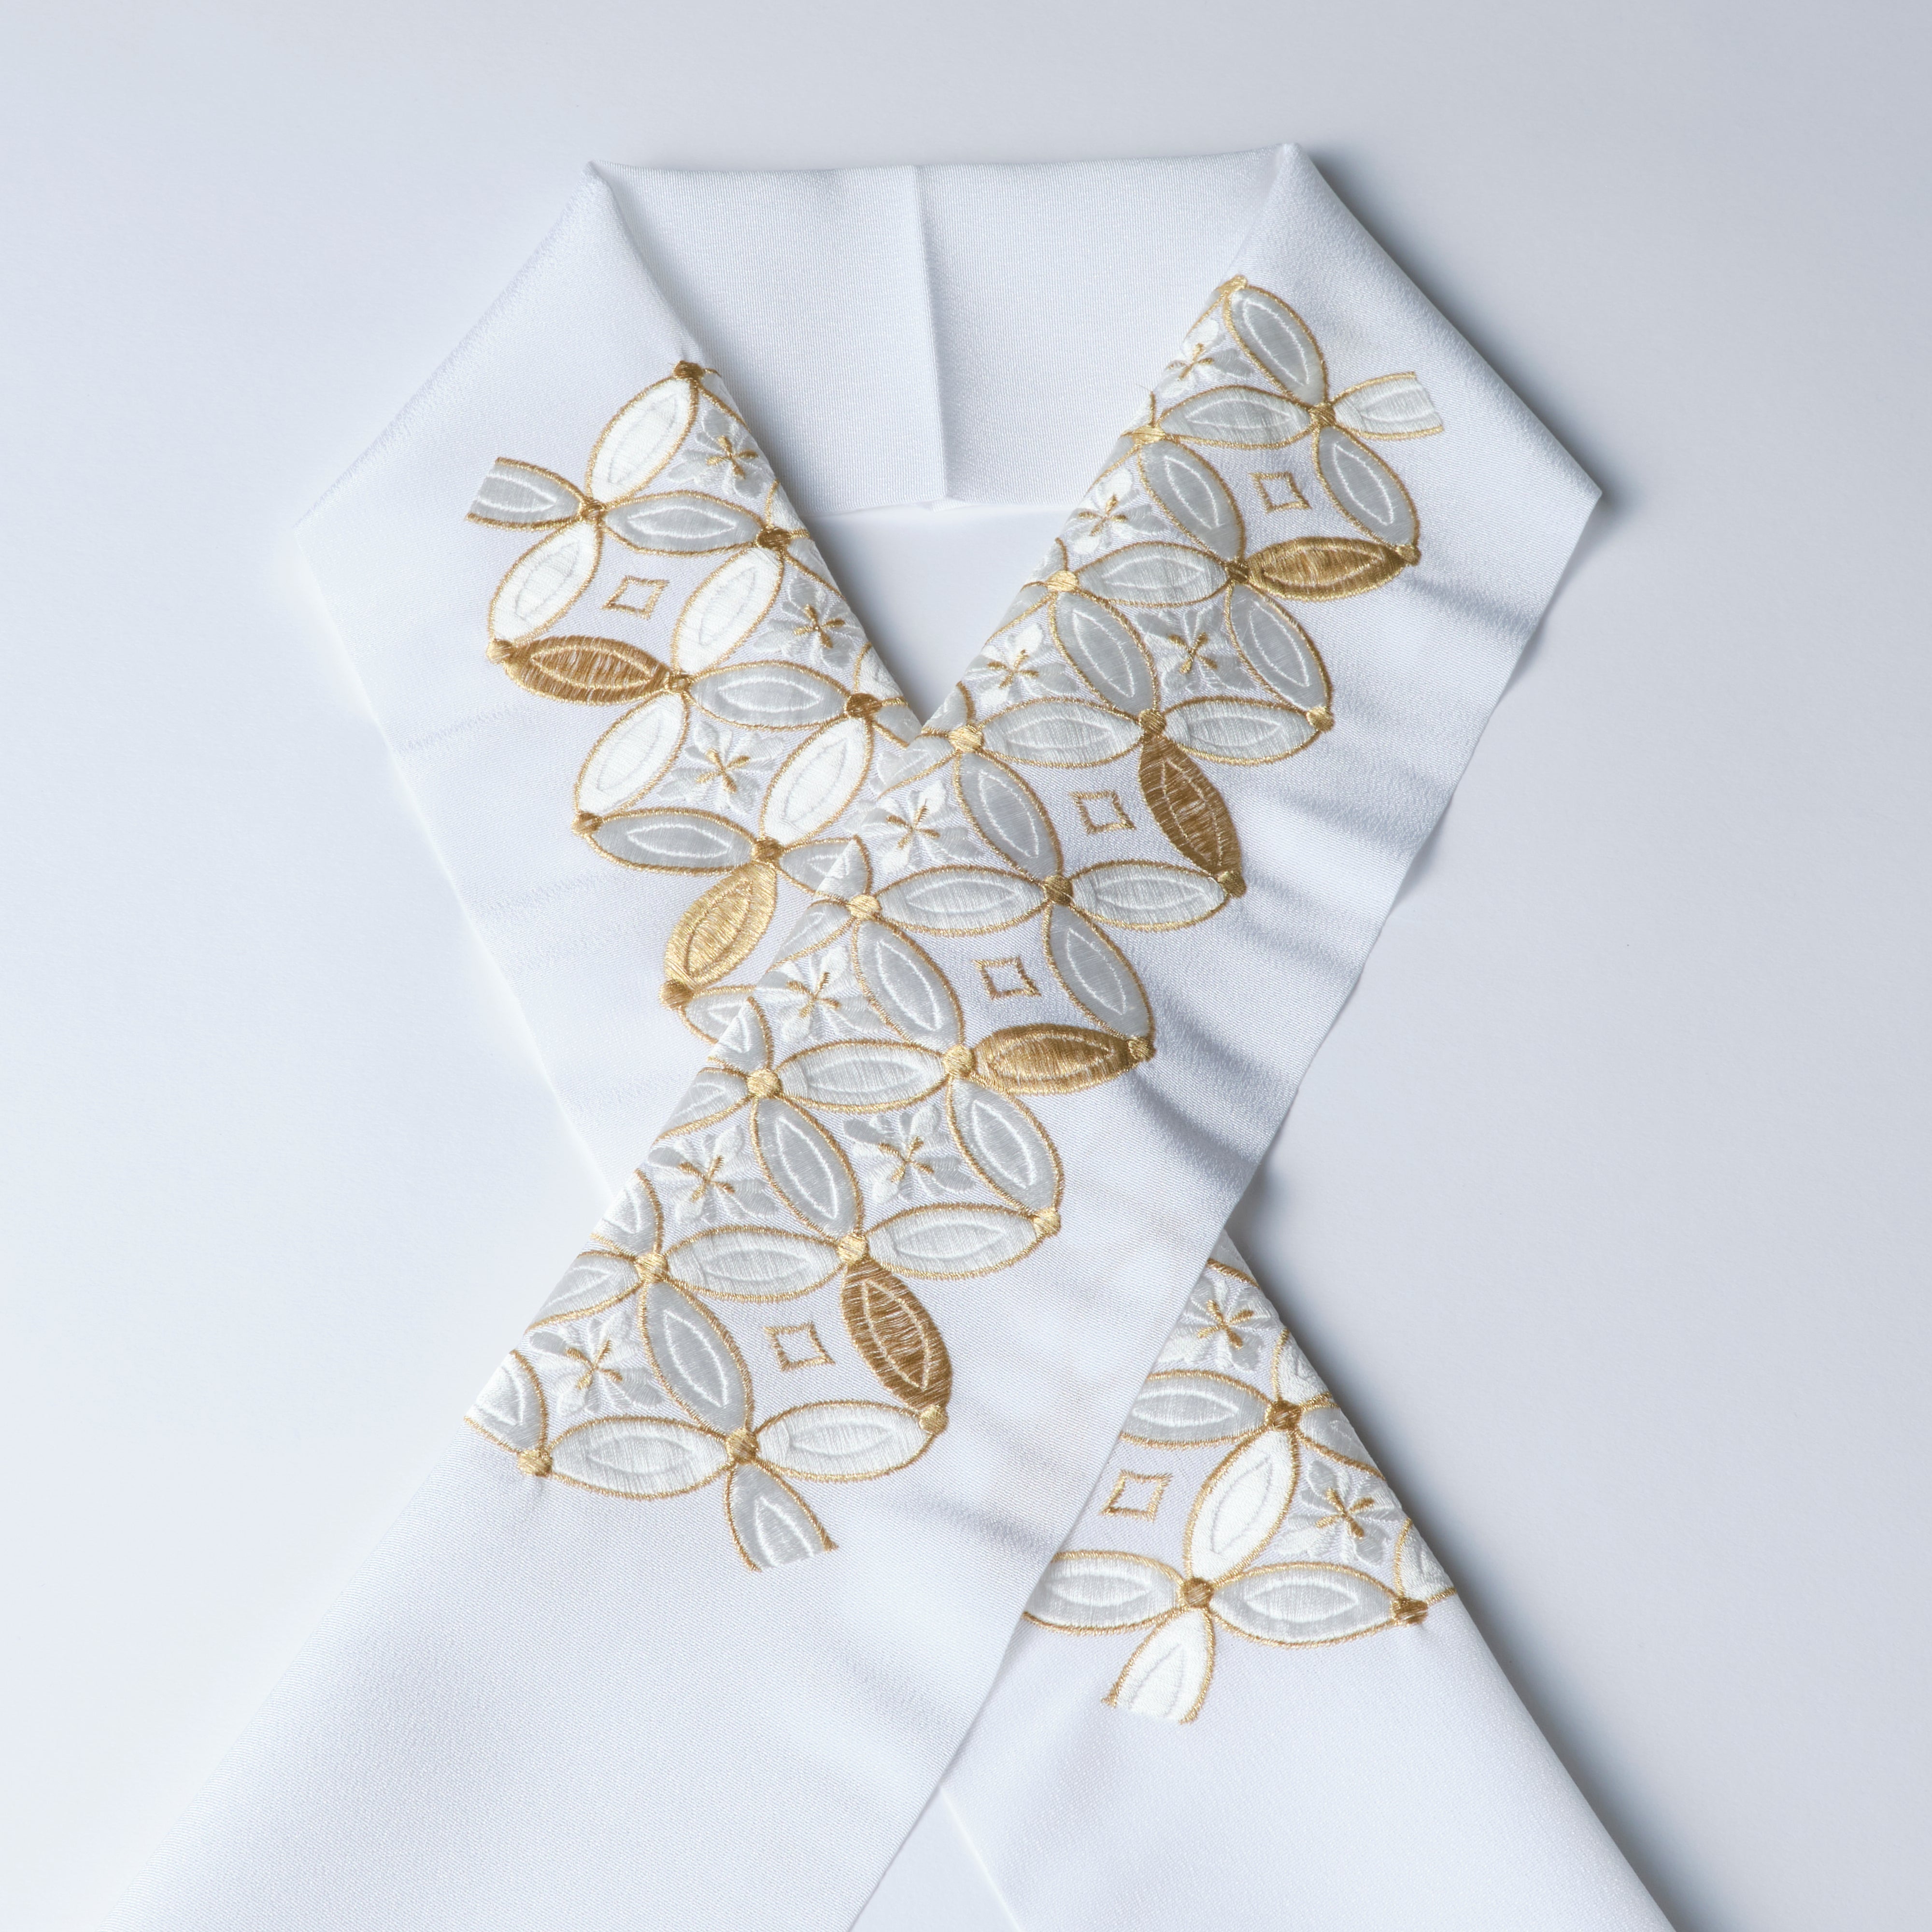 Half-collar embroidery "Cloisonne" white/gold